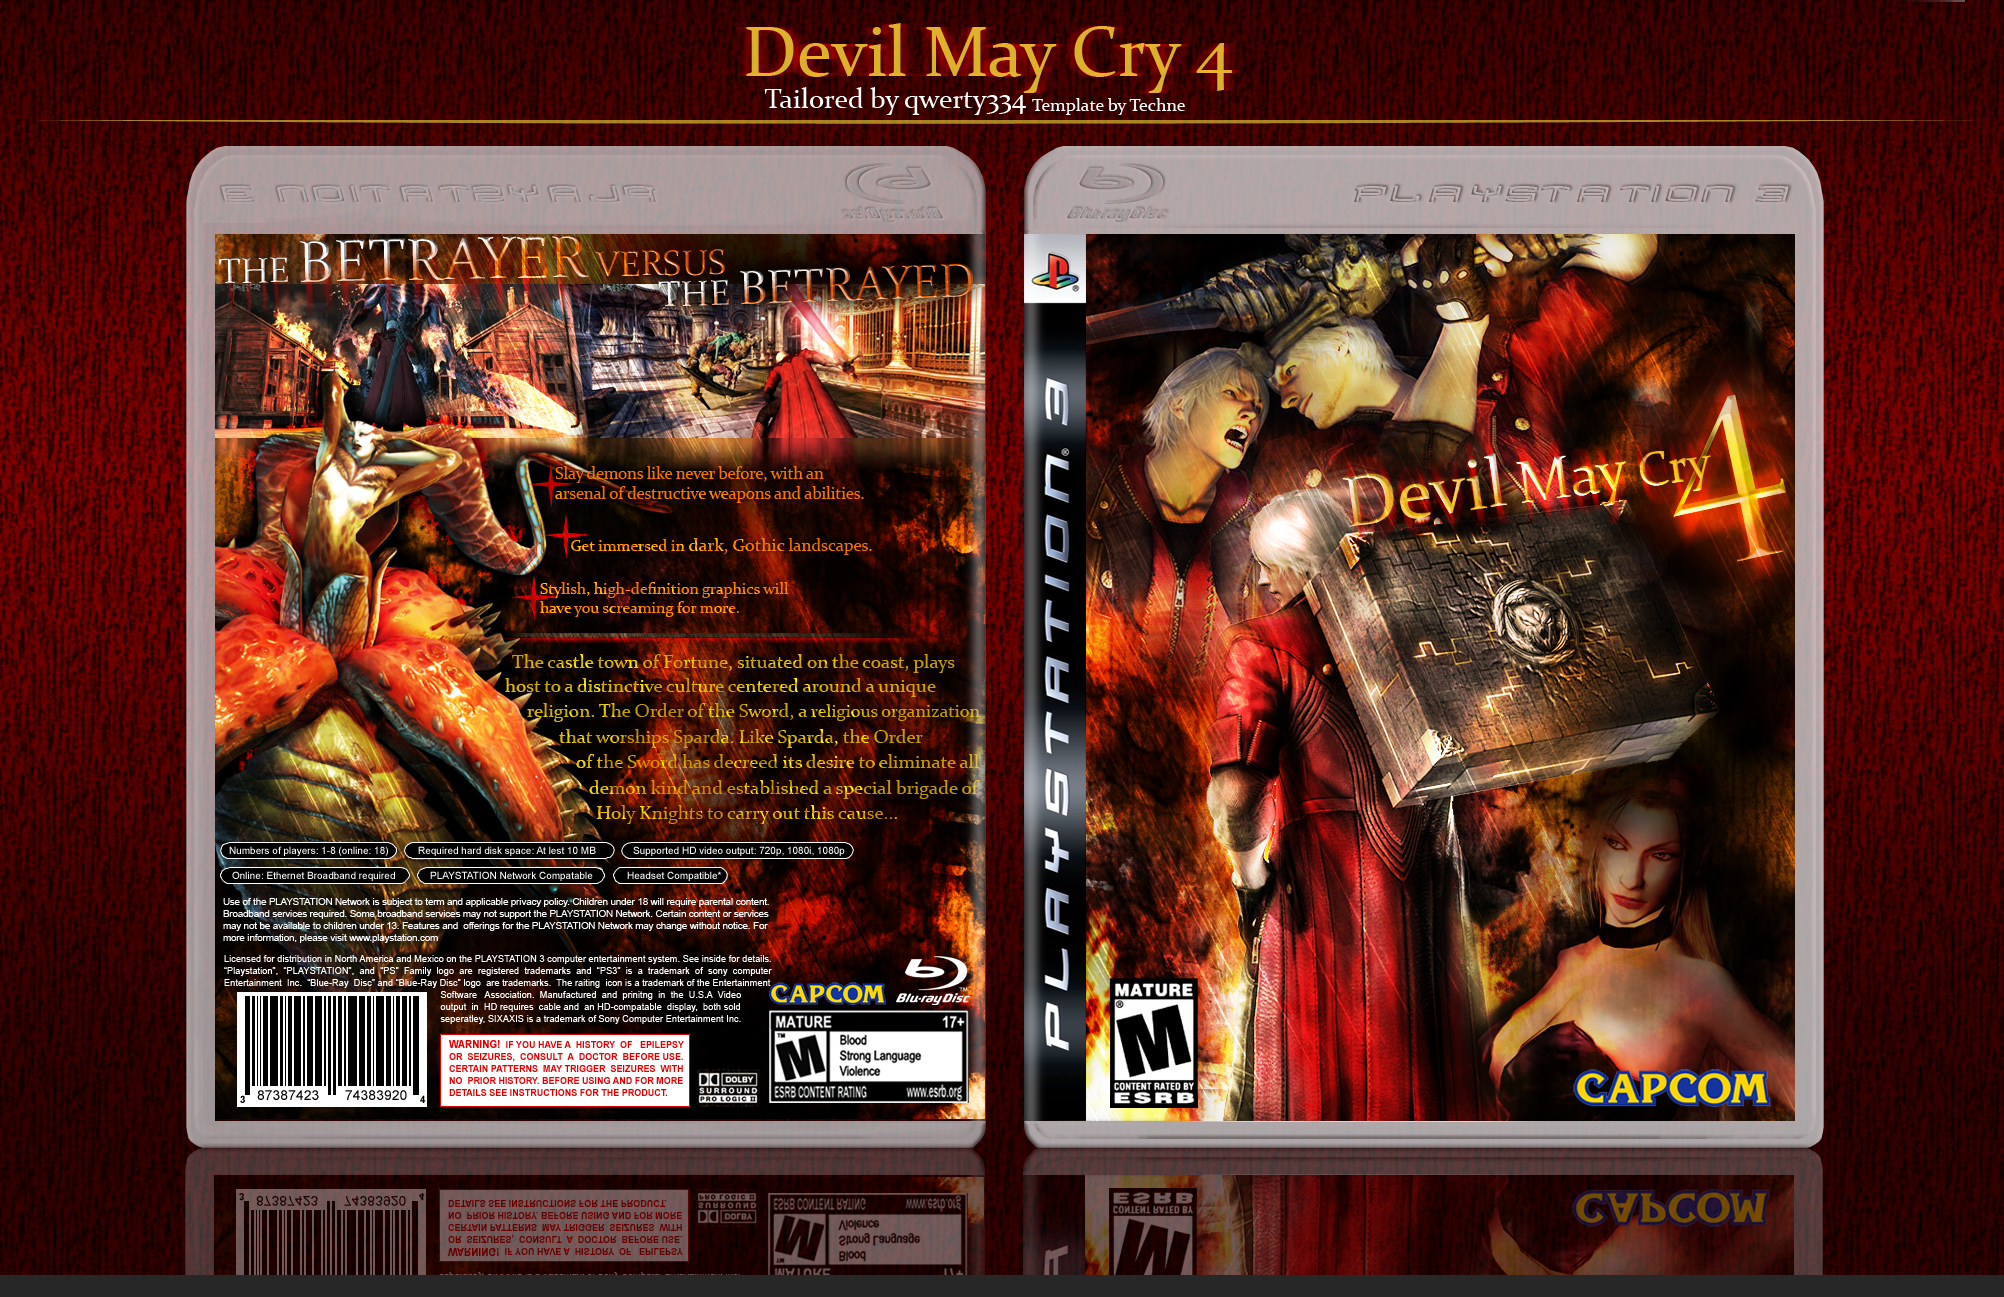 Ps3 devil may. DMC Devil May Cry Xbox 360 диск. Devil May Cry 4 диск. Devil May Cry 4 ps3 обложка. Devil May Cry 4 ps3 диск.